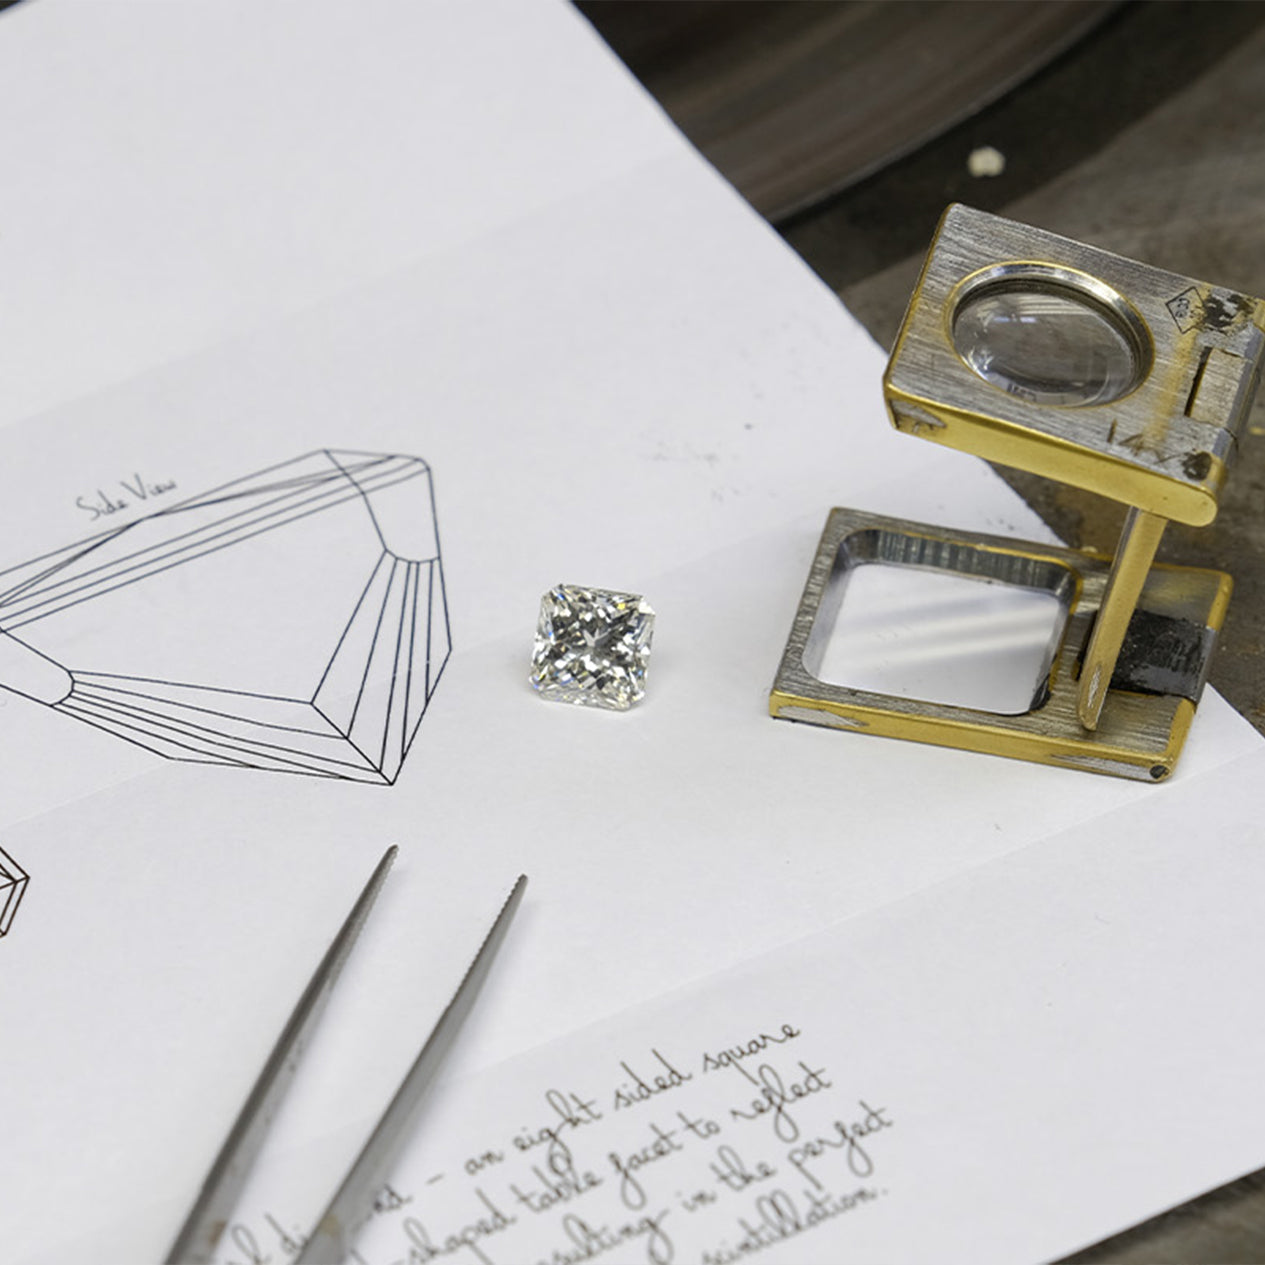 Shimansky Jewellery Drawing of a diamond cut with microscope and inspection tool